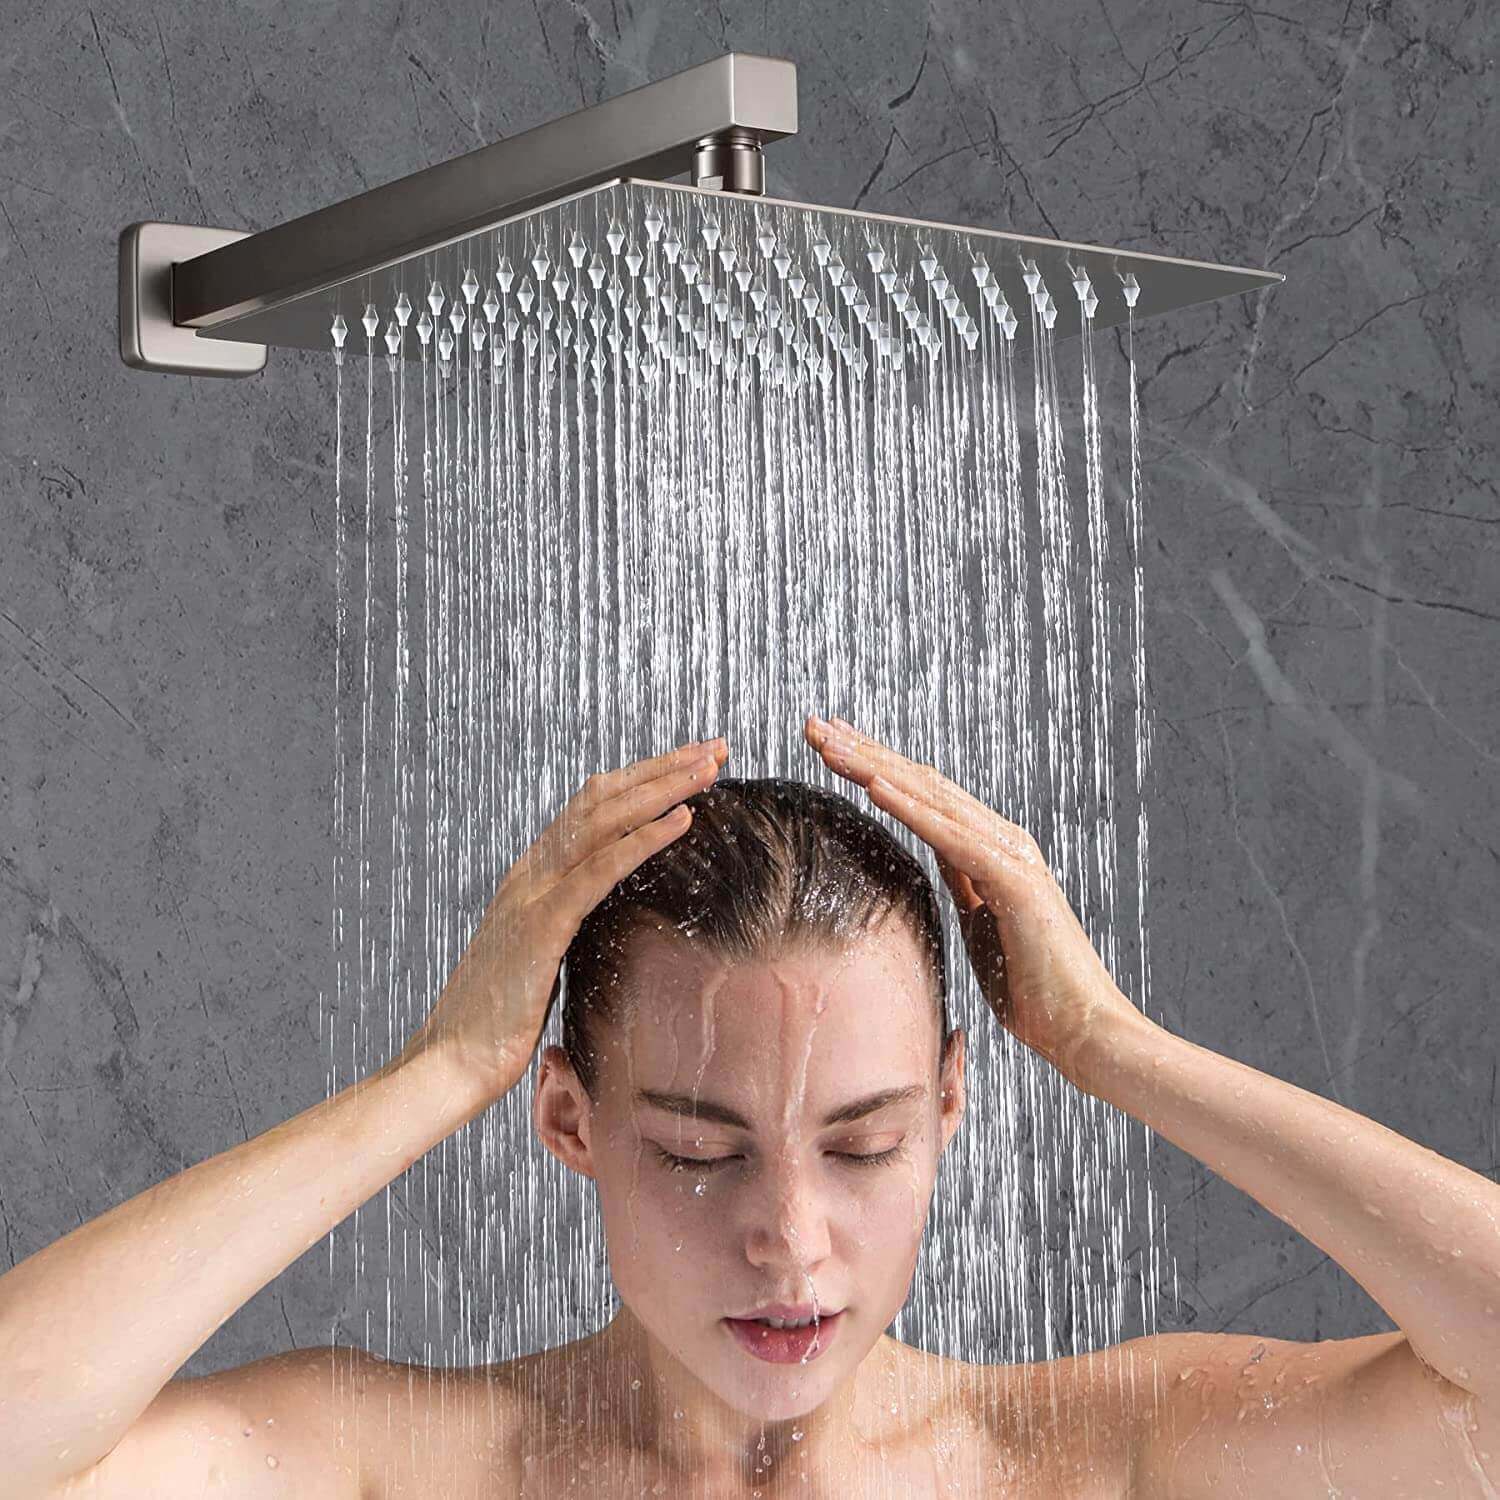 wowow brushed nickel luxury shower system with high pressure 10 rain shower head and handheld